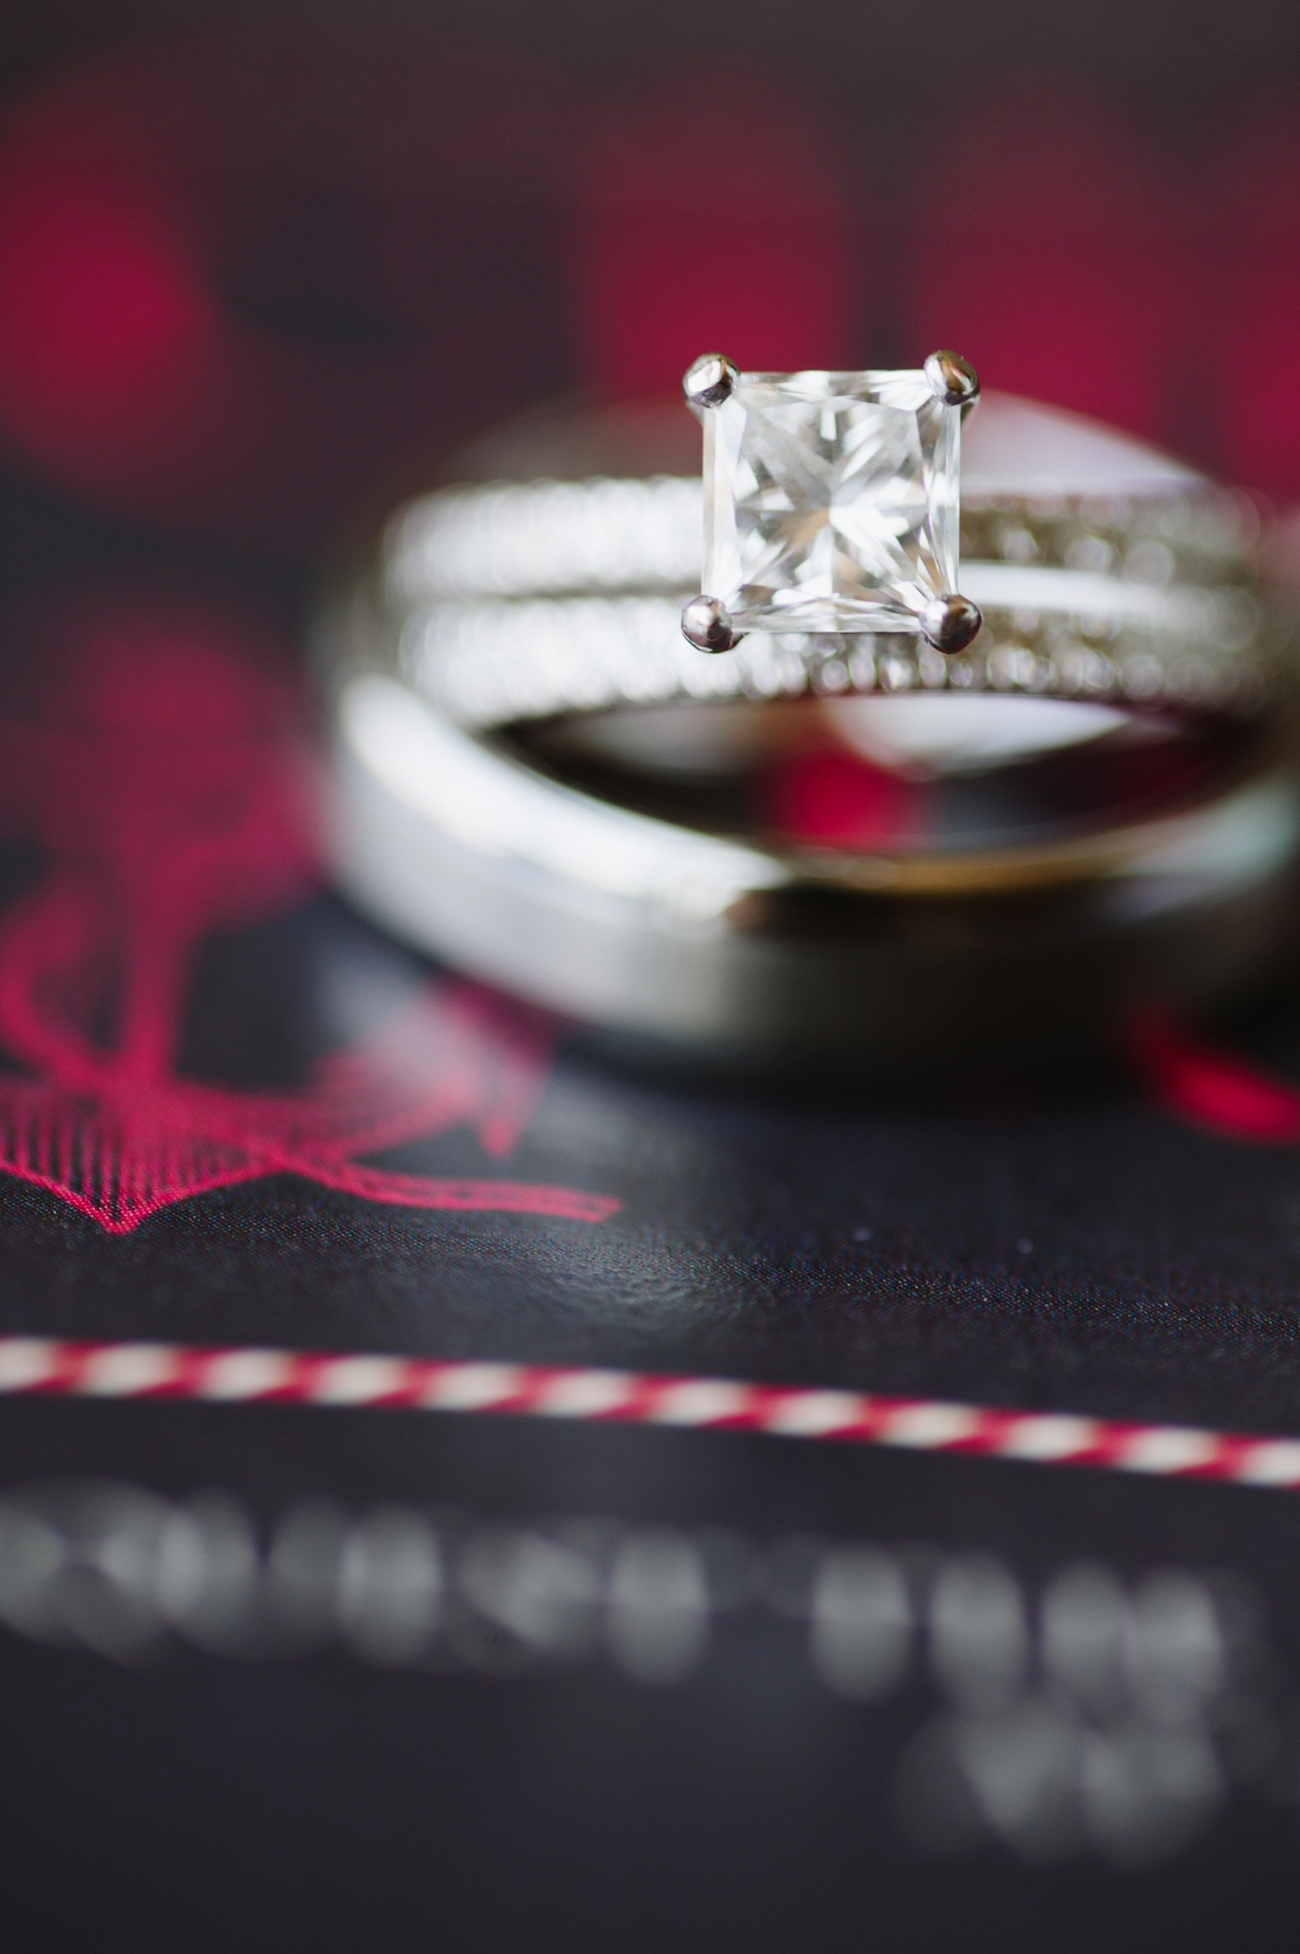 Nautical Invitation and Princess Cut Engagement Ring with Anchor Detail | Natalie Franke Photography